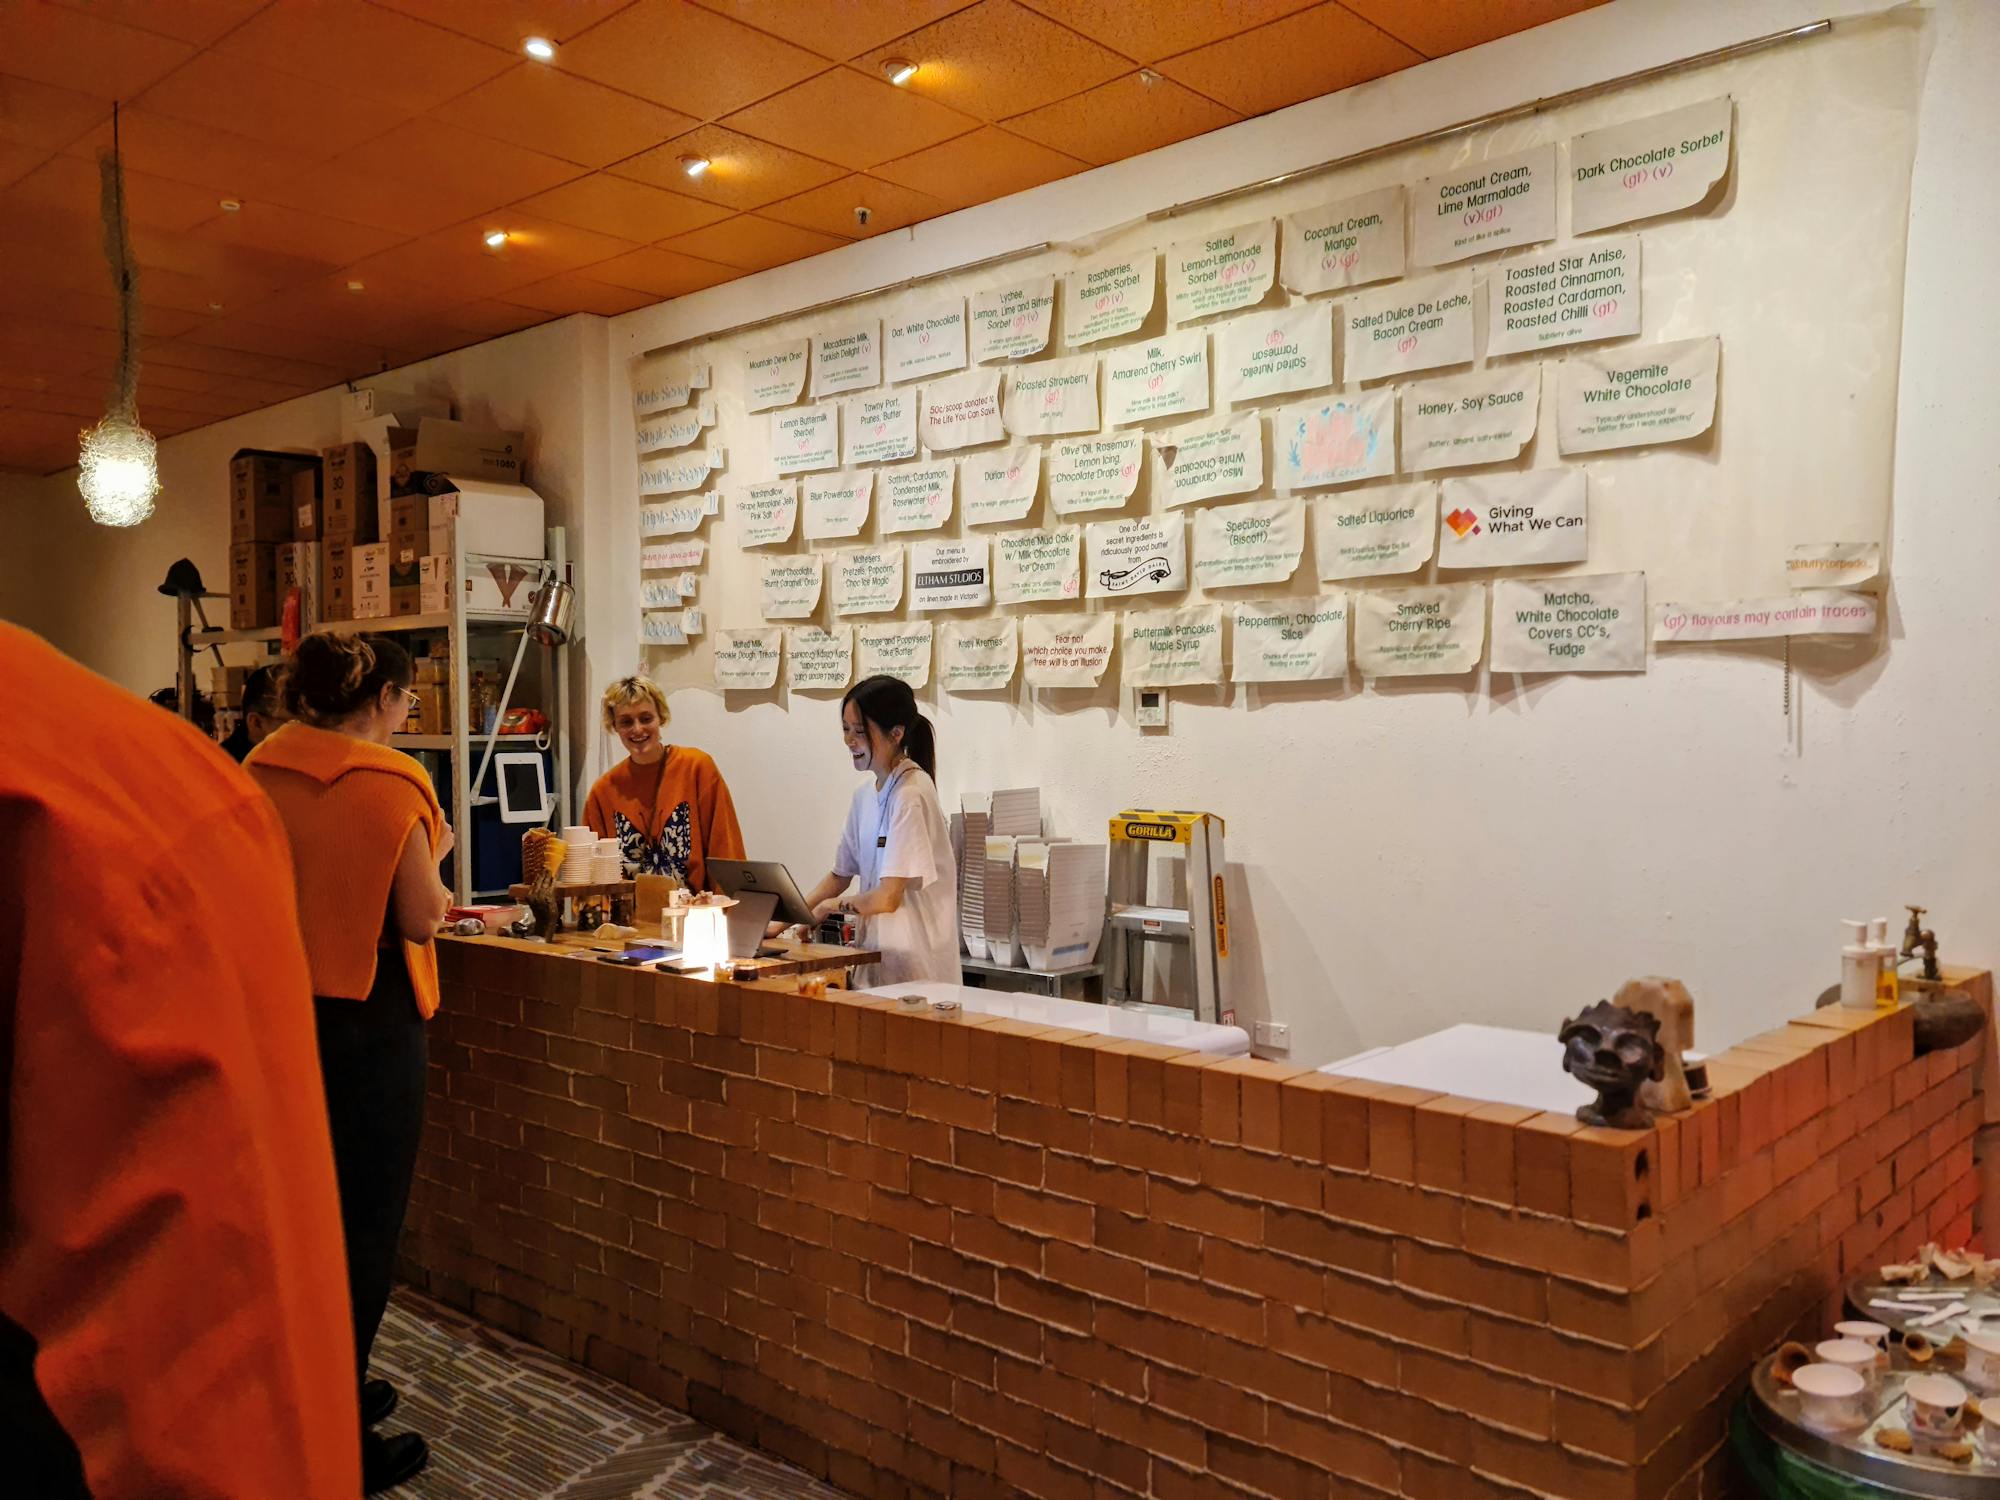 Two servers behind a brick counter serving gelato from eskies.